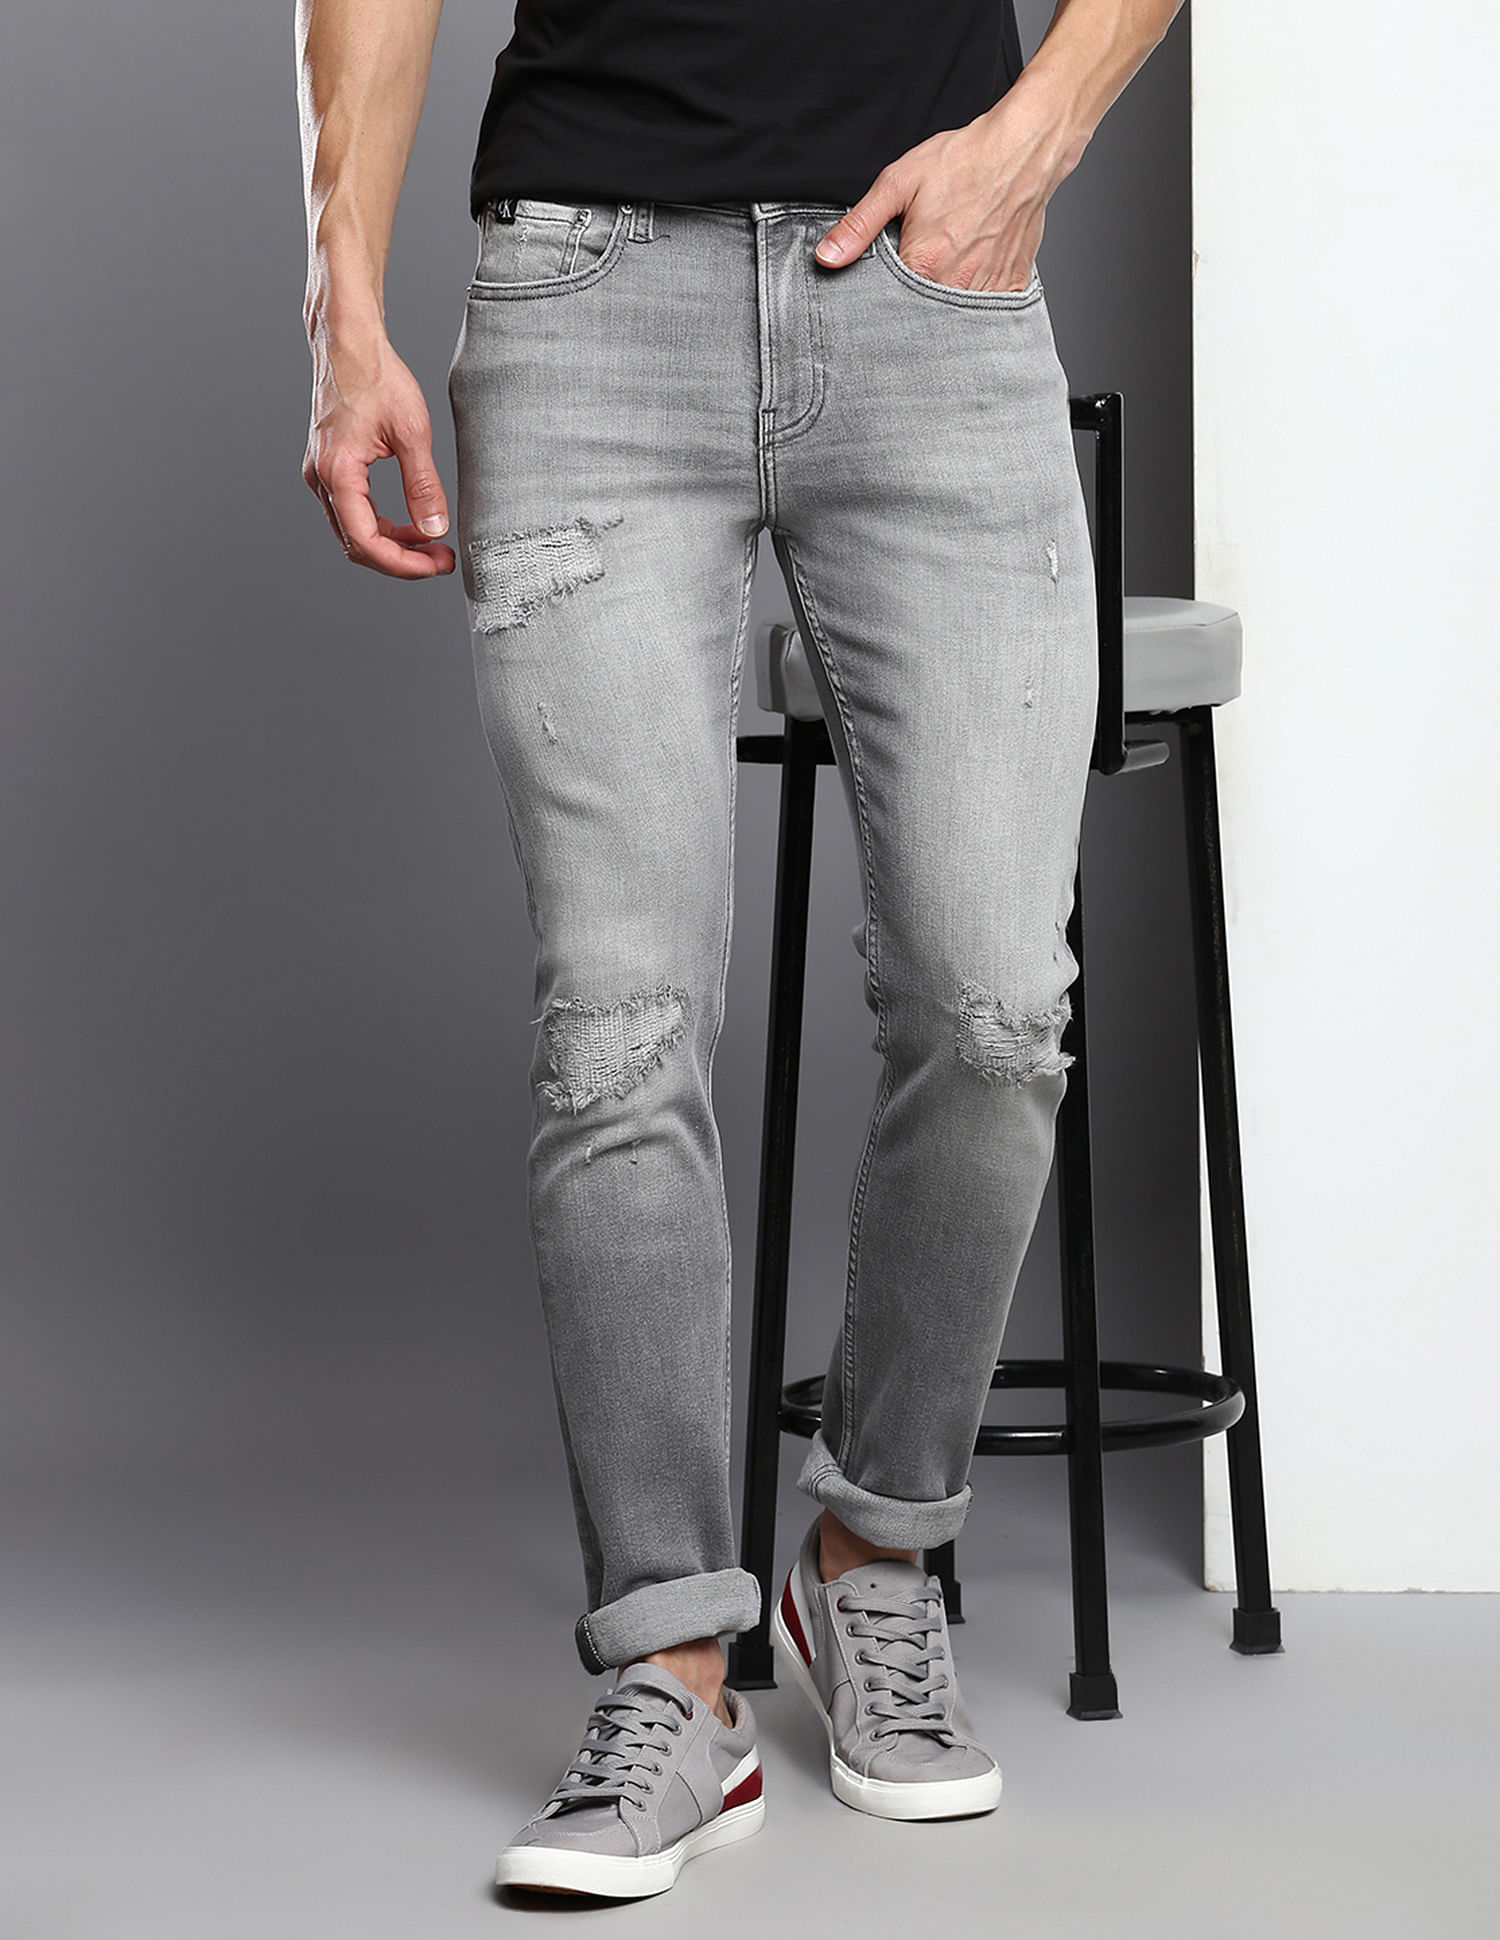 Buy Calvin Klein Jeans Stone Wash Skinny Fit Jeans 